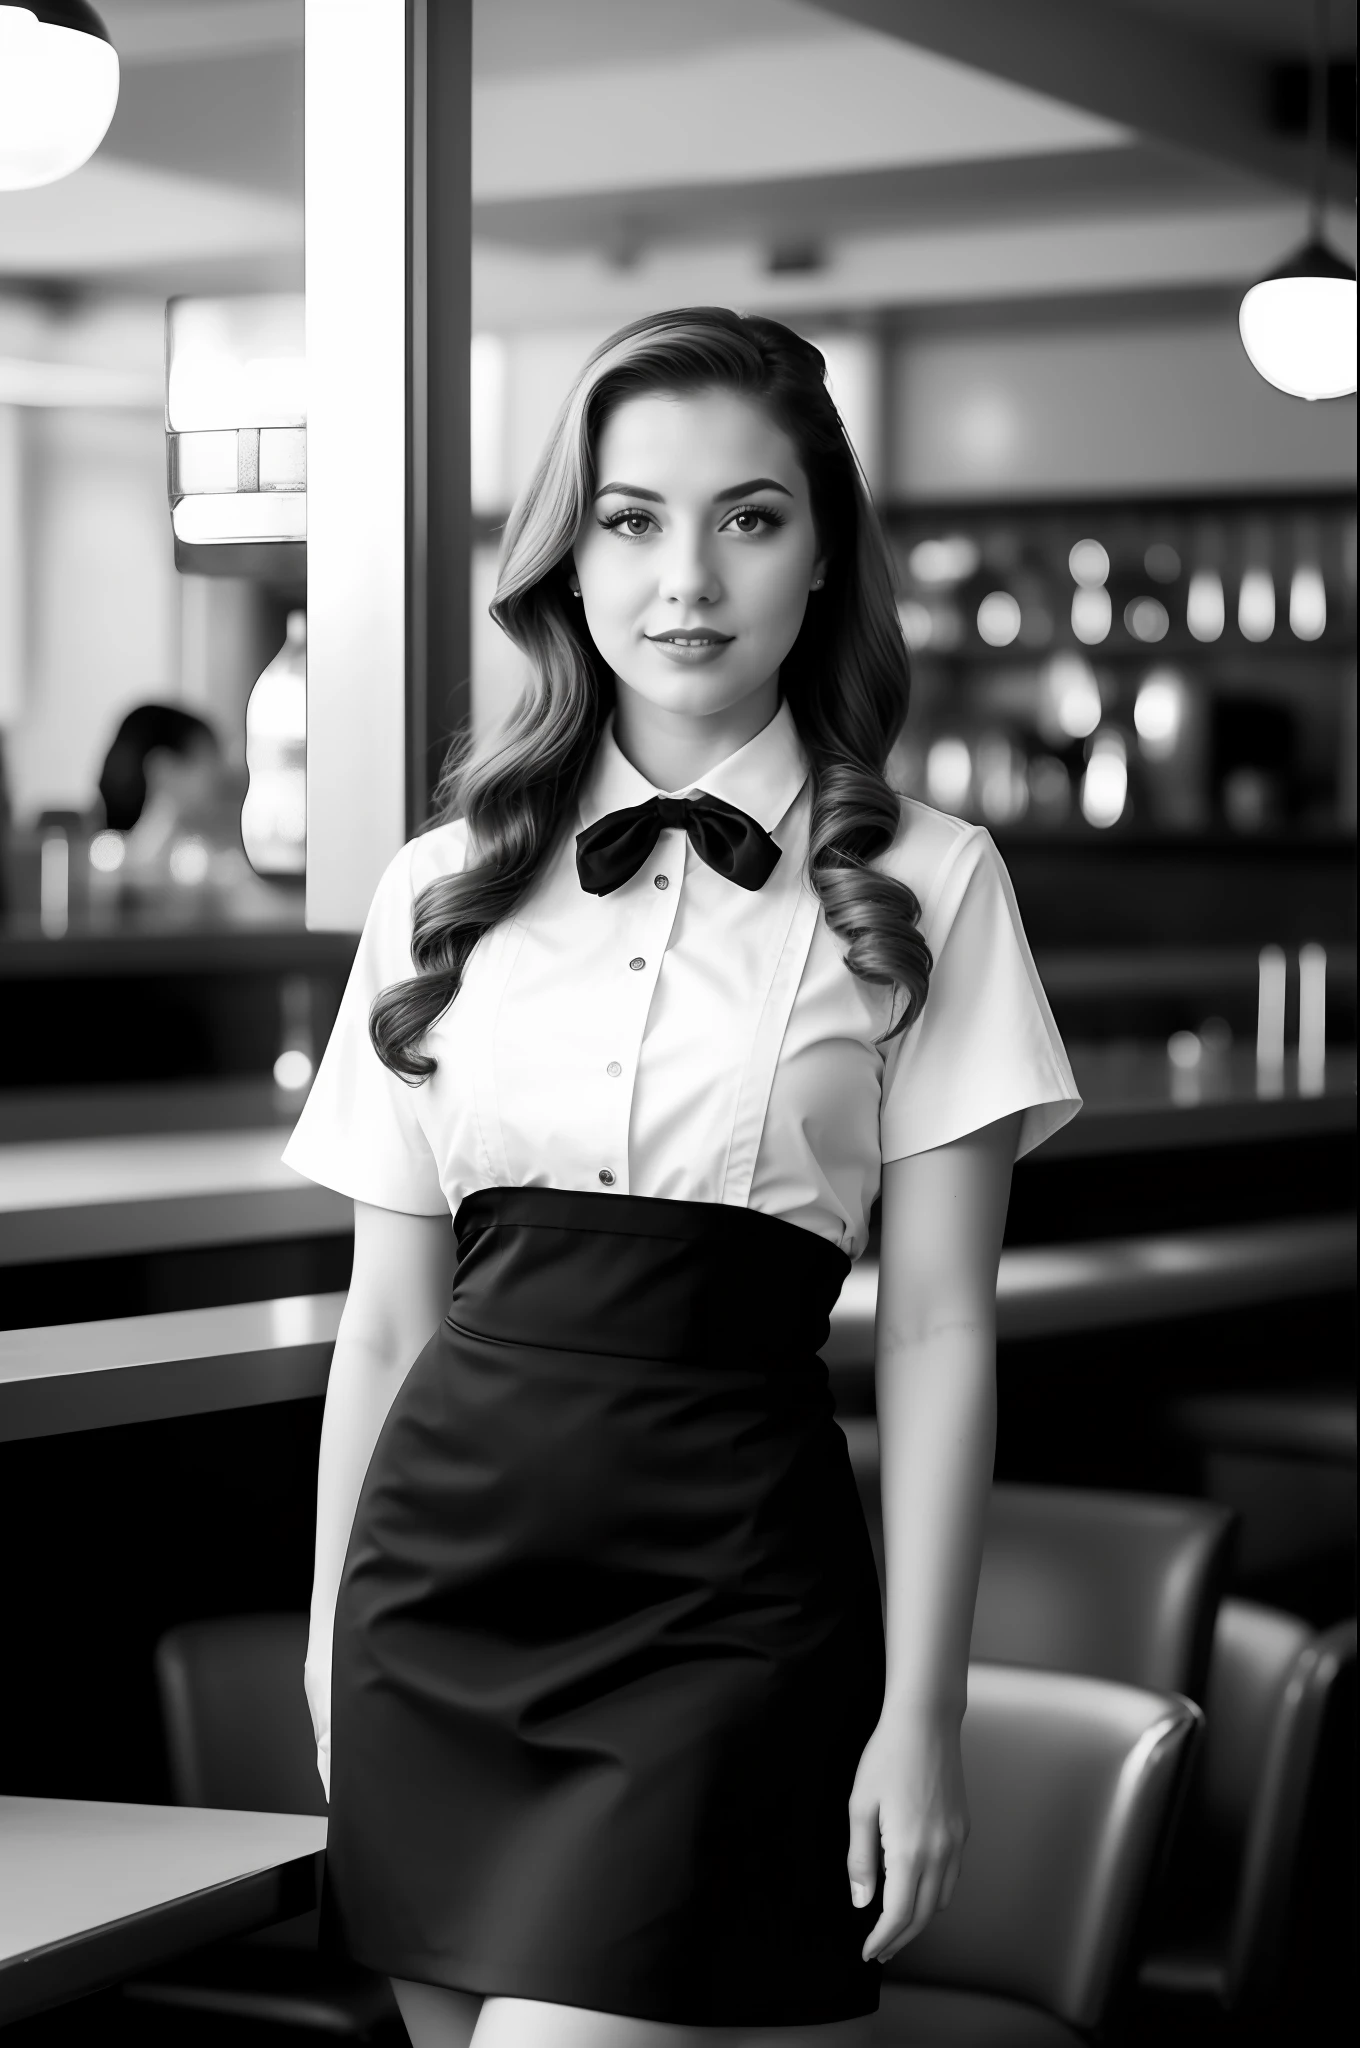 Detailed vintage diner with blond waitress serving customers, black and white theme, 1940s dress, detailed face, professional lighting, busy background, ((realistic)), camera blurr, sharp focus, single female, 1girl, solo female, short skirt, monochrome